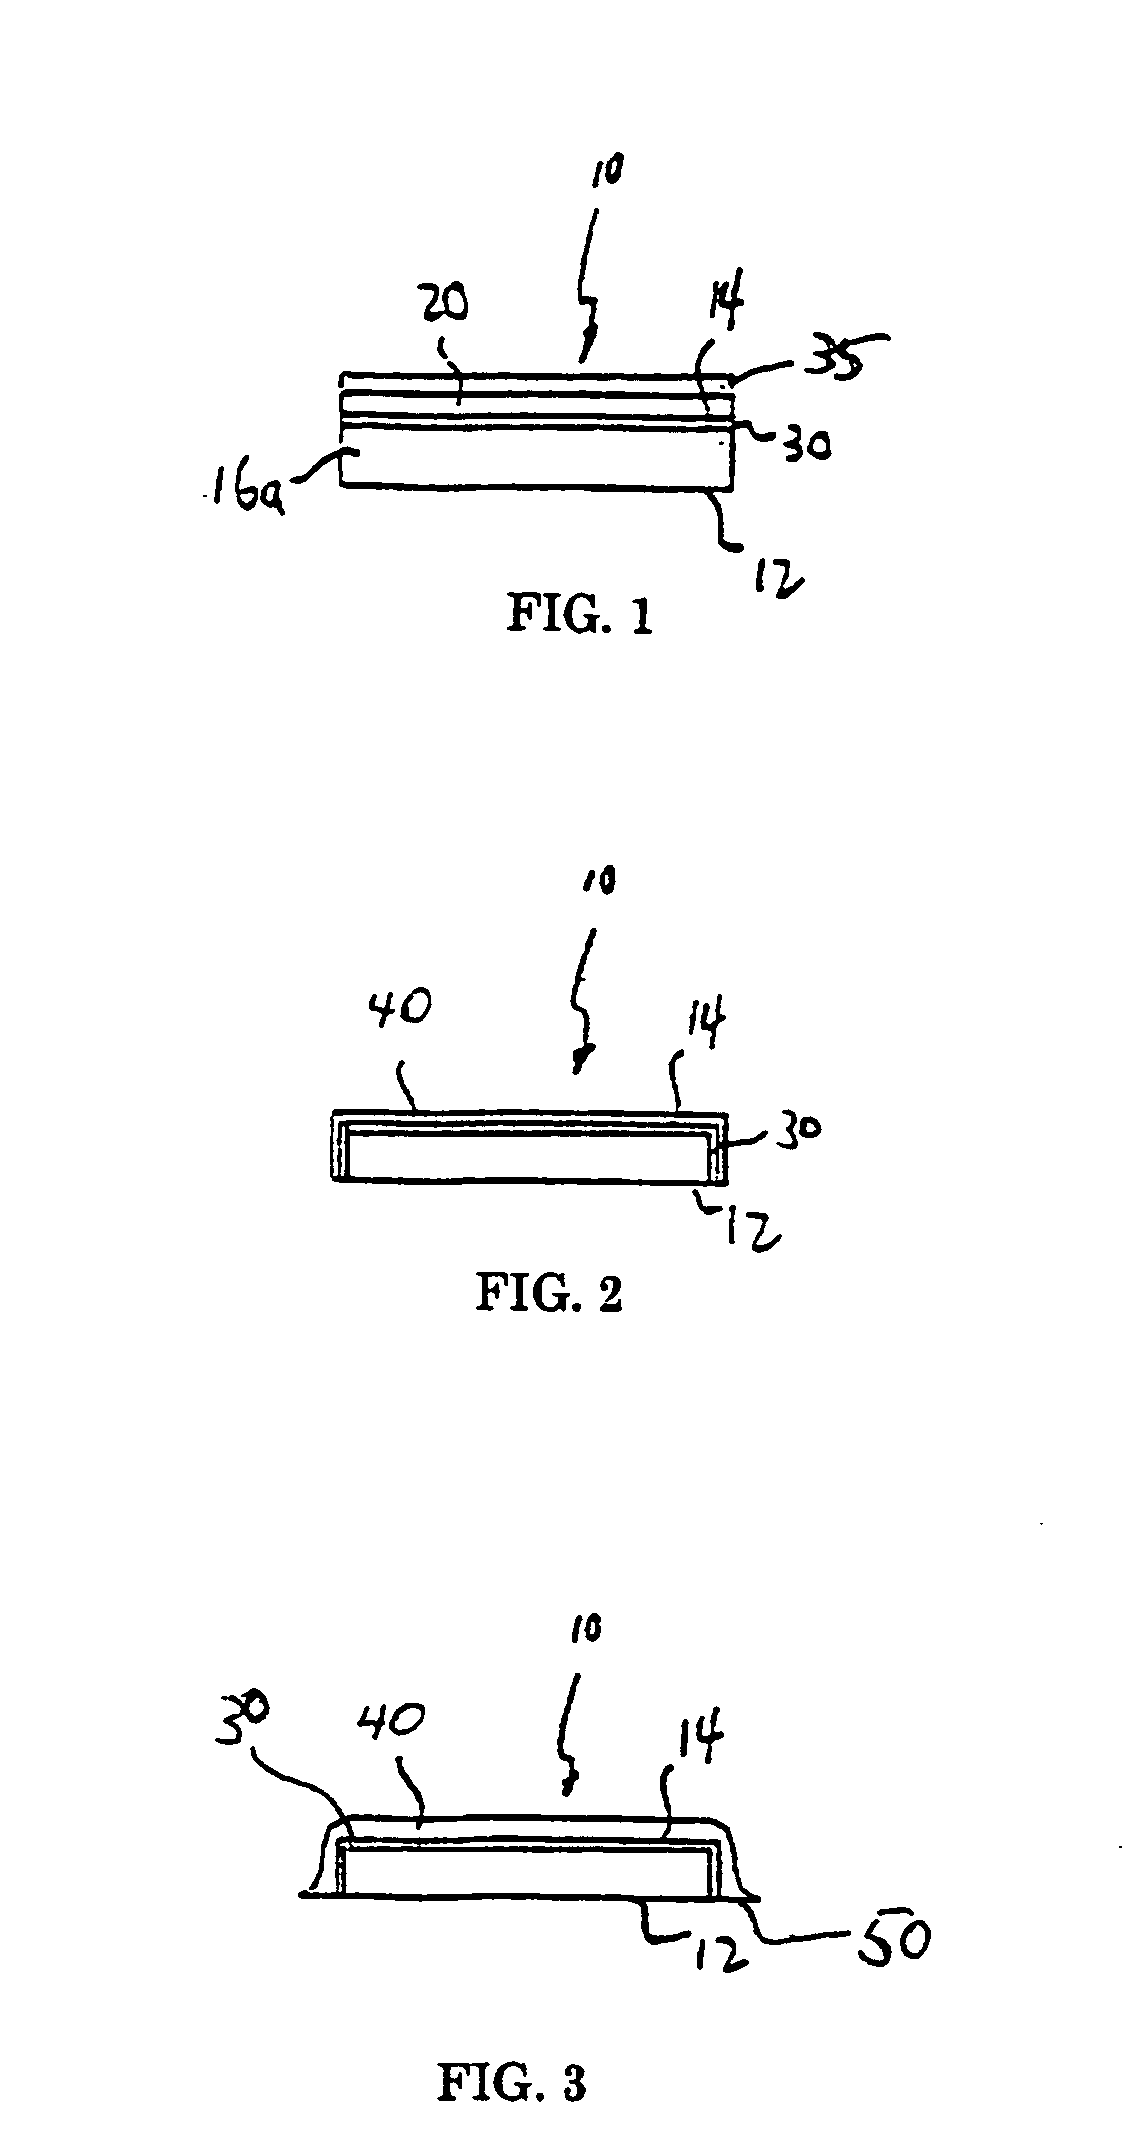 Heat spreader for display device